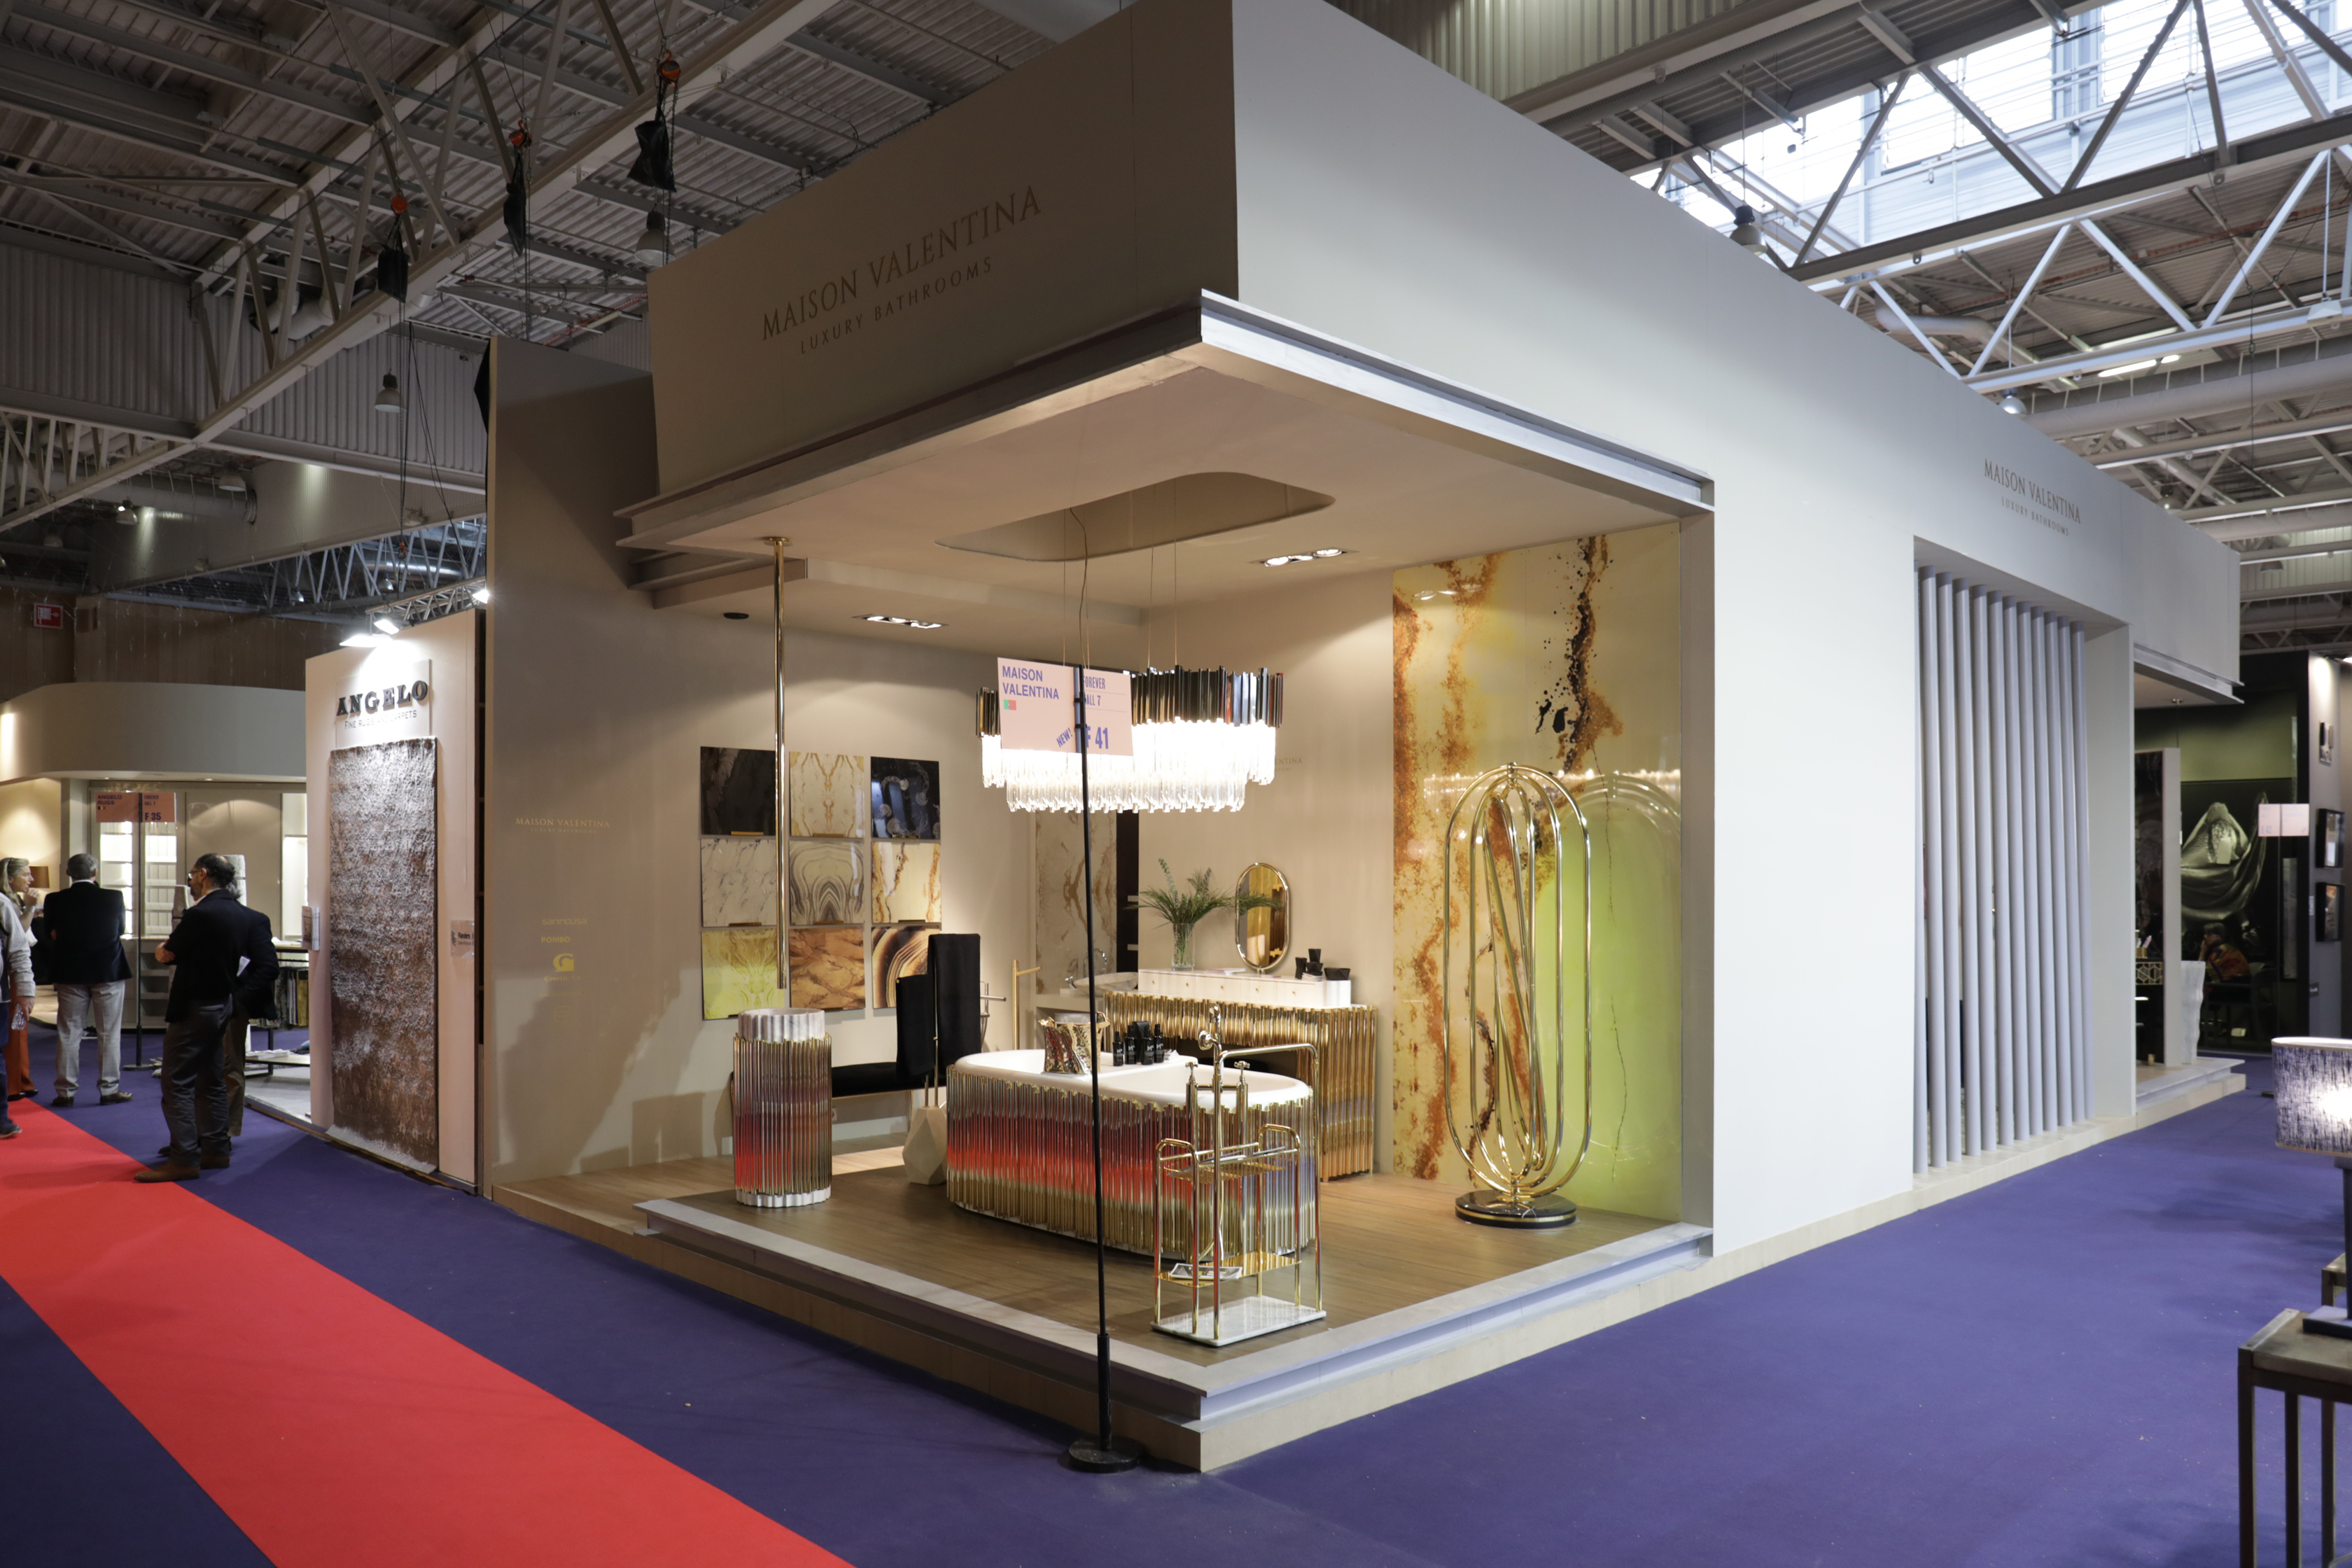 Maison et Objet 2020: The Top Brands You Need To Visit